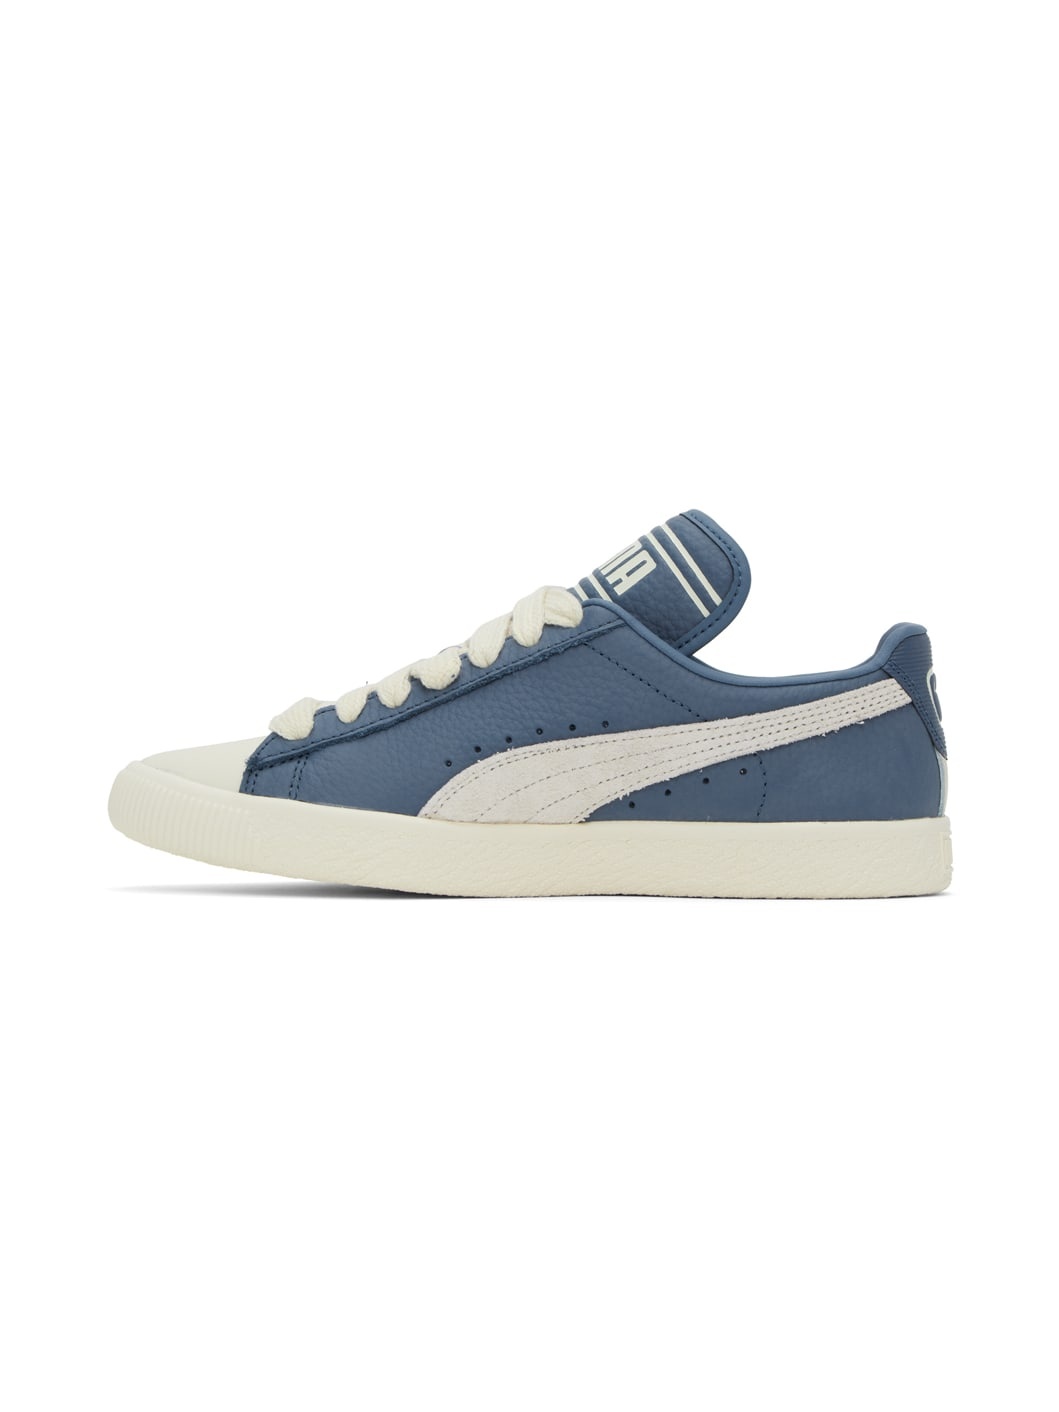 Blue Puma Edition Clyde Q-3 Sneakers - 3